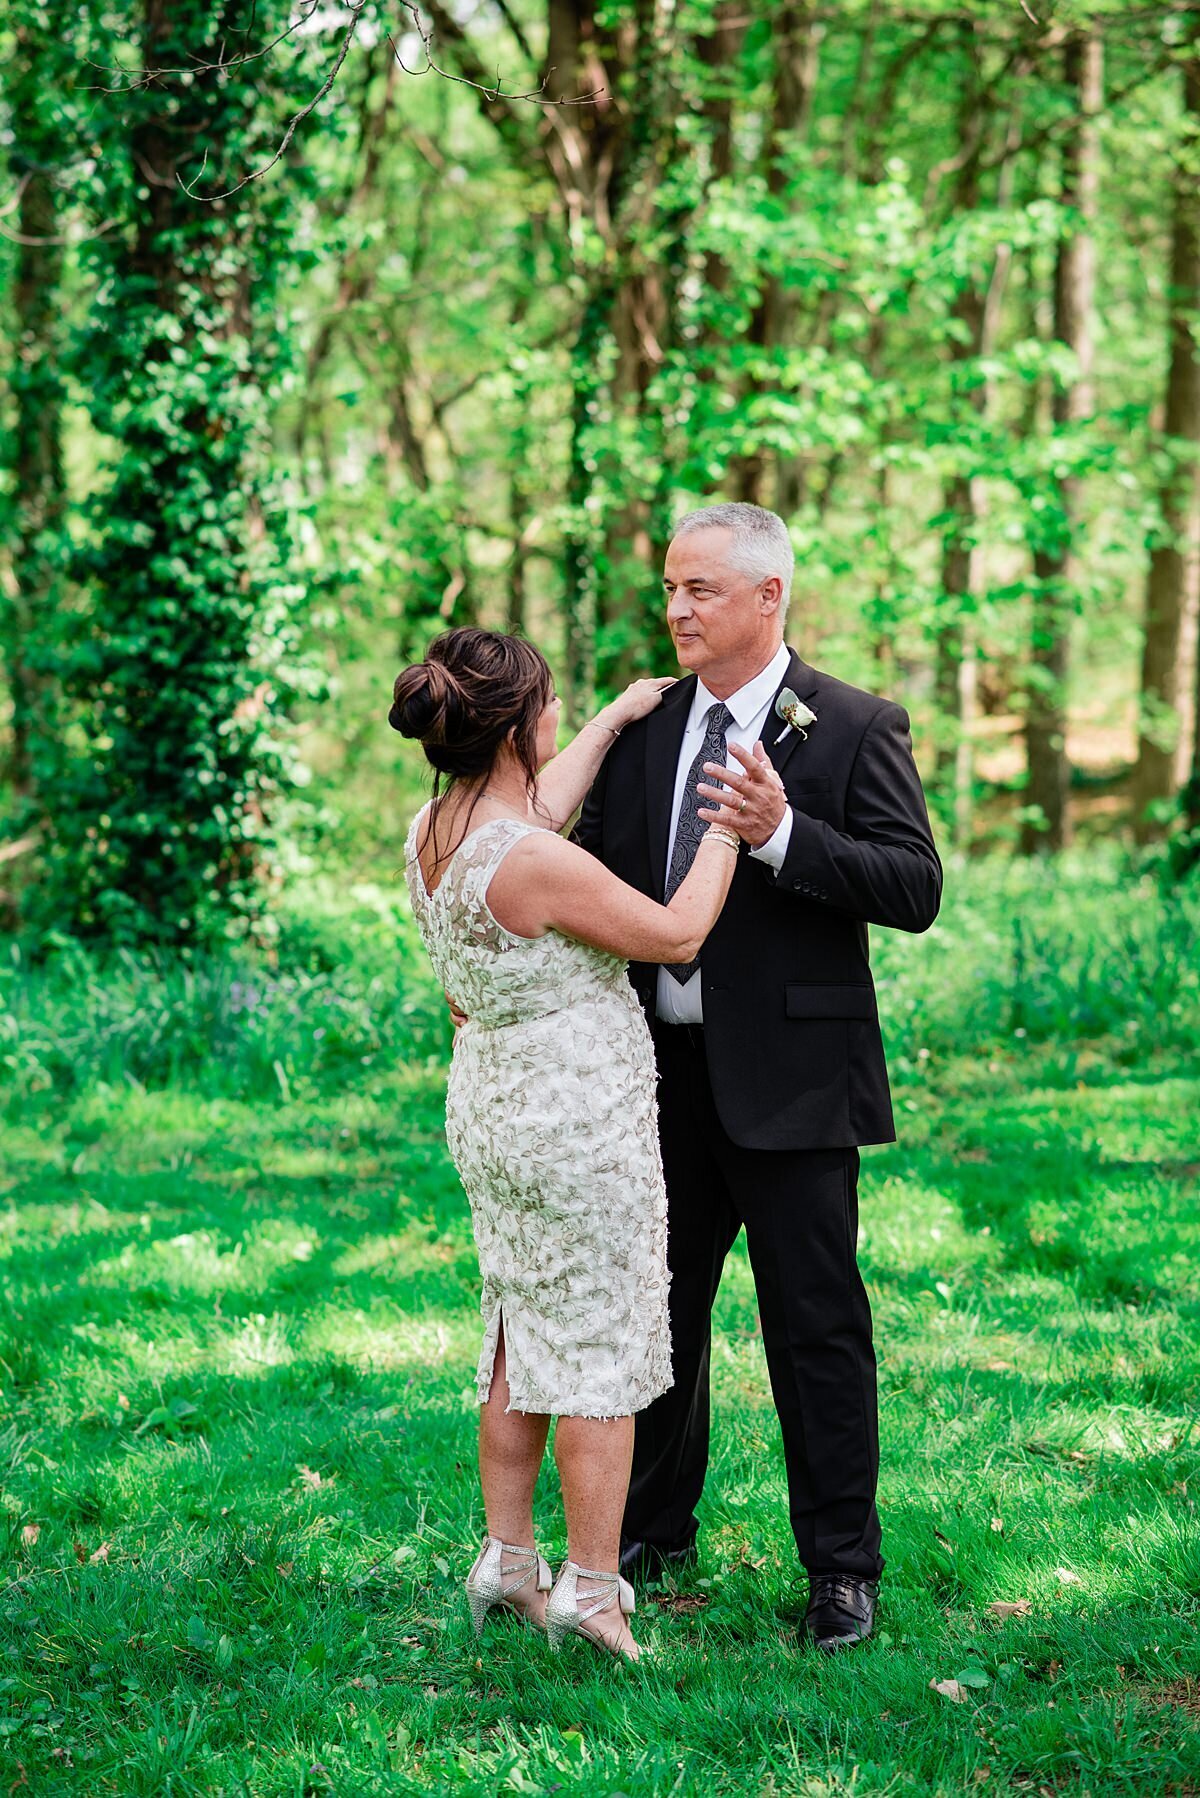 the bride and groom dance in the grass at the edge of the woods at Oaklands Mansion. The bride is wearing a tea length sheath sleeveless lace dress and stillettos with ankle bows. The groom is wearing a black suit with a dark patterned tie and a white boutonniere pinned to his lapel.